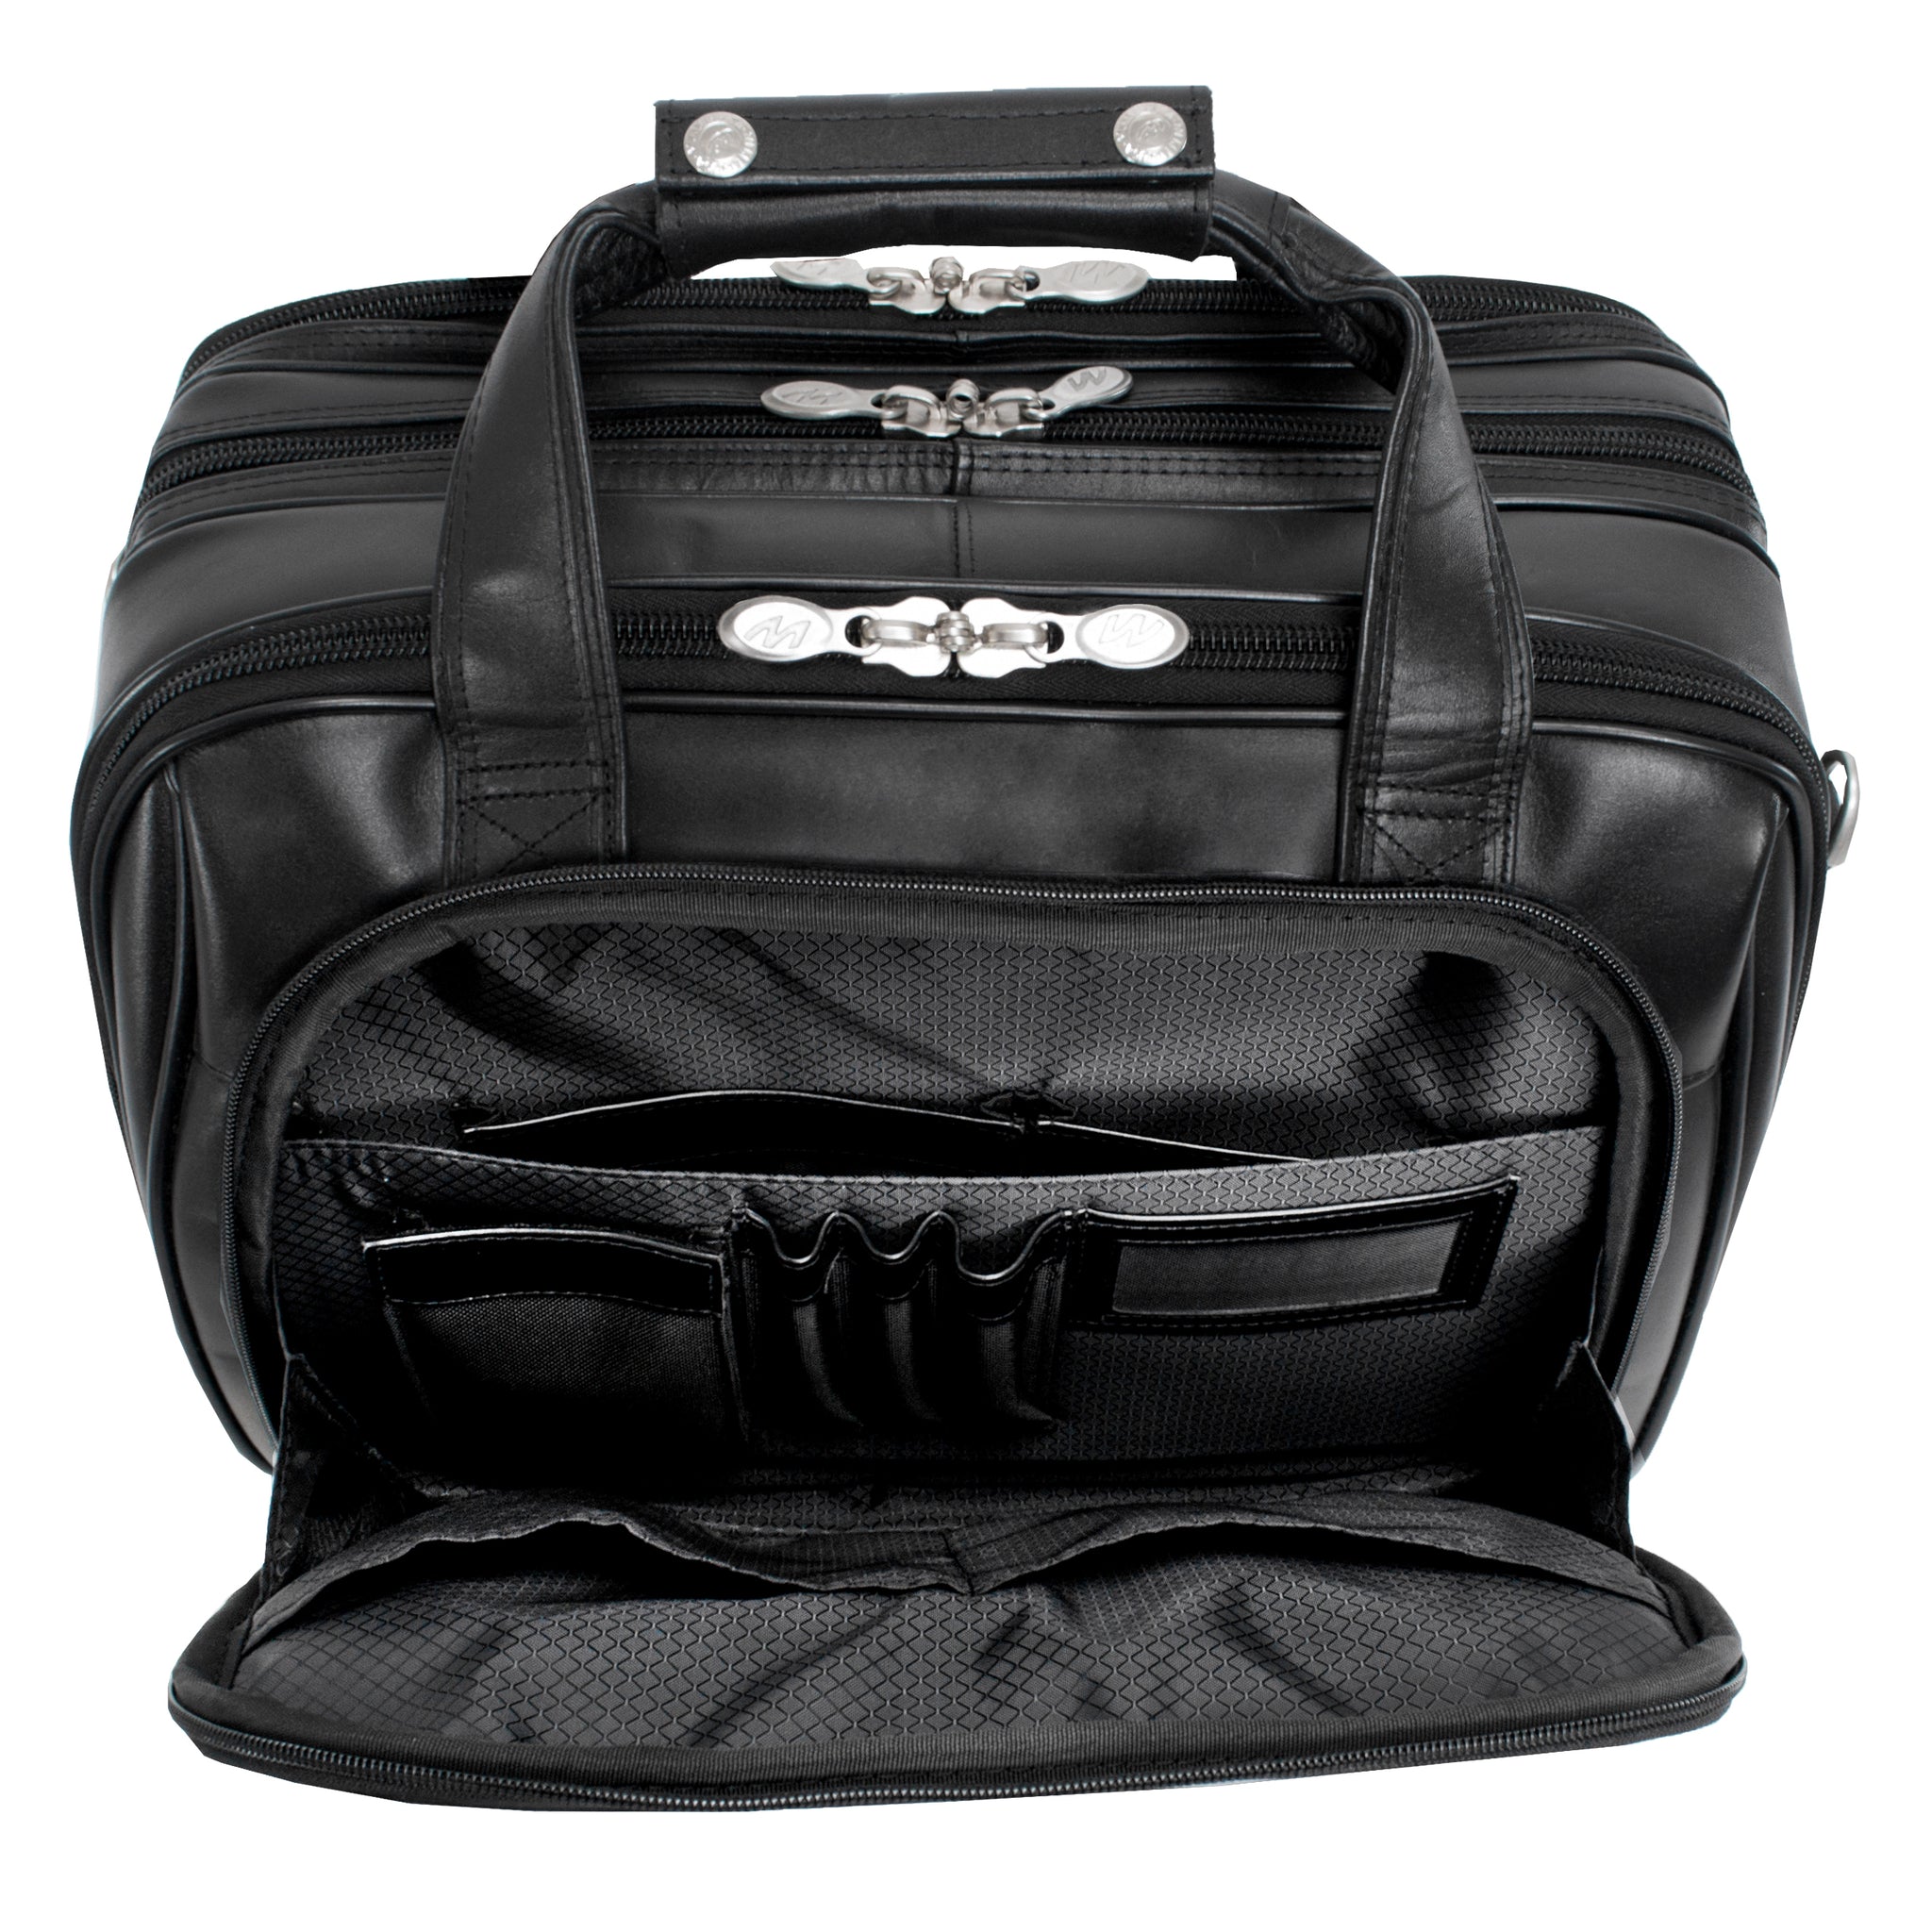 McKlein CHICAGO 17" Leather Patented Detachable -Wheeled Laptop Overnight with Removable Briefcase